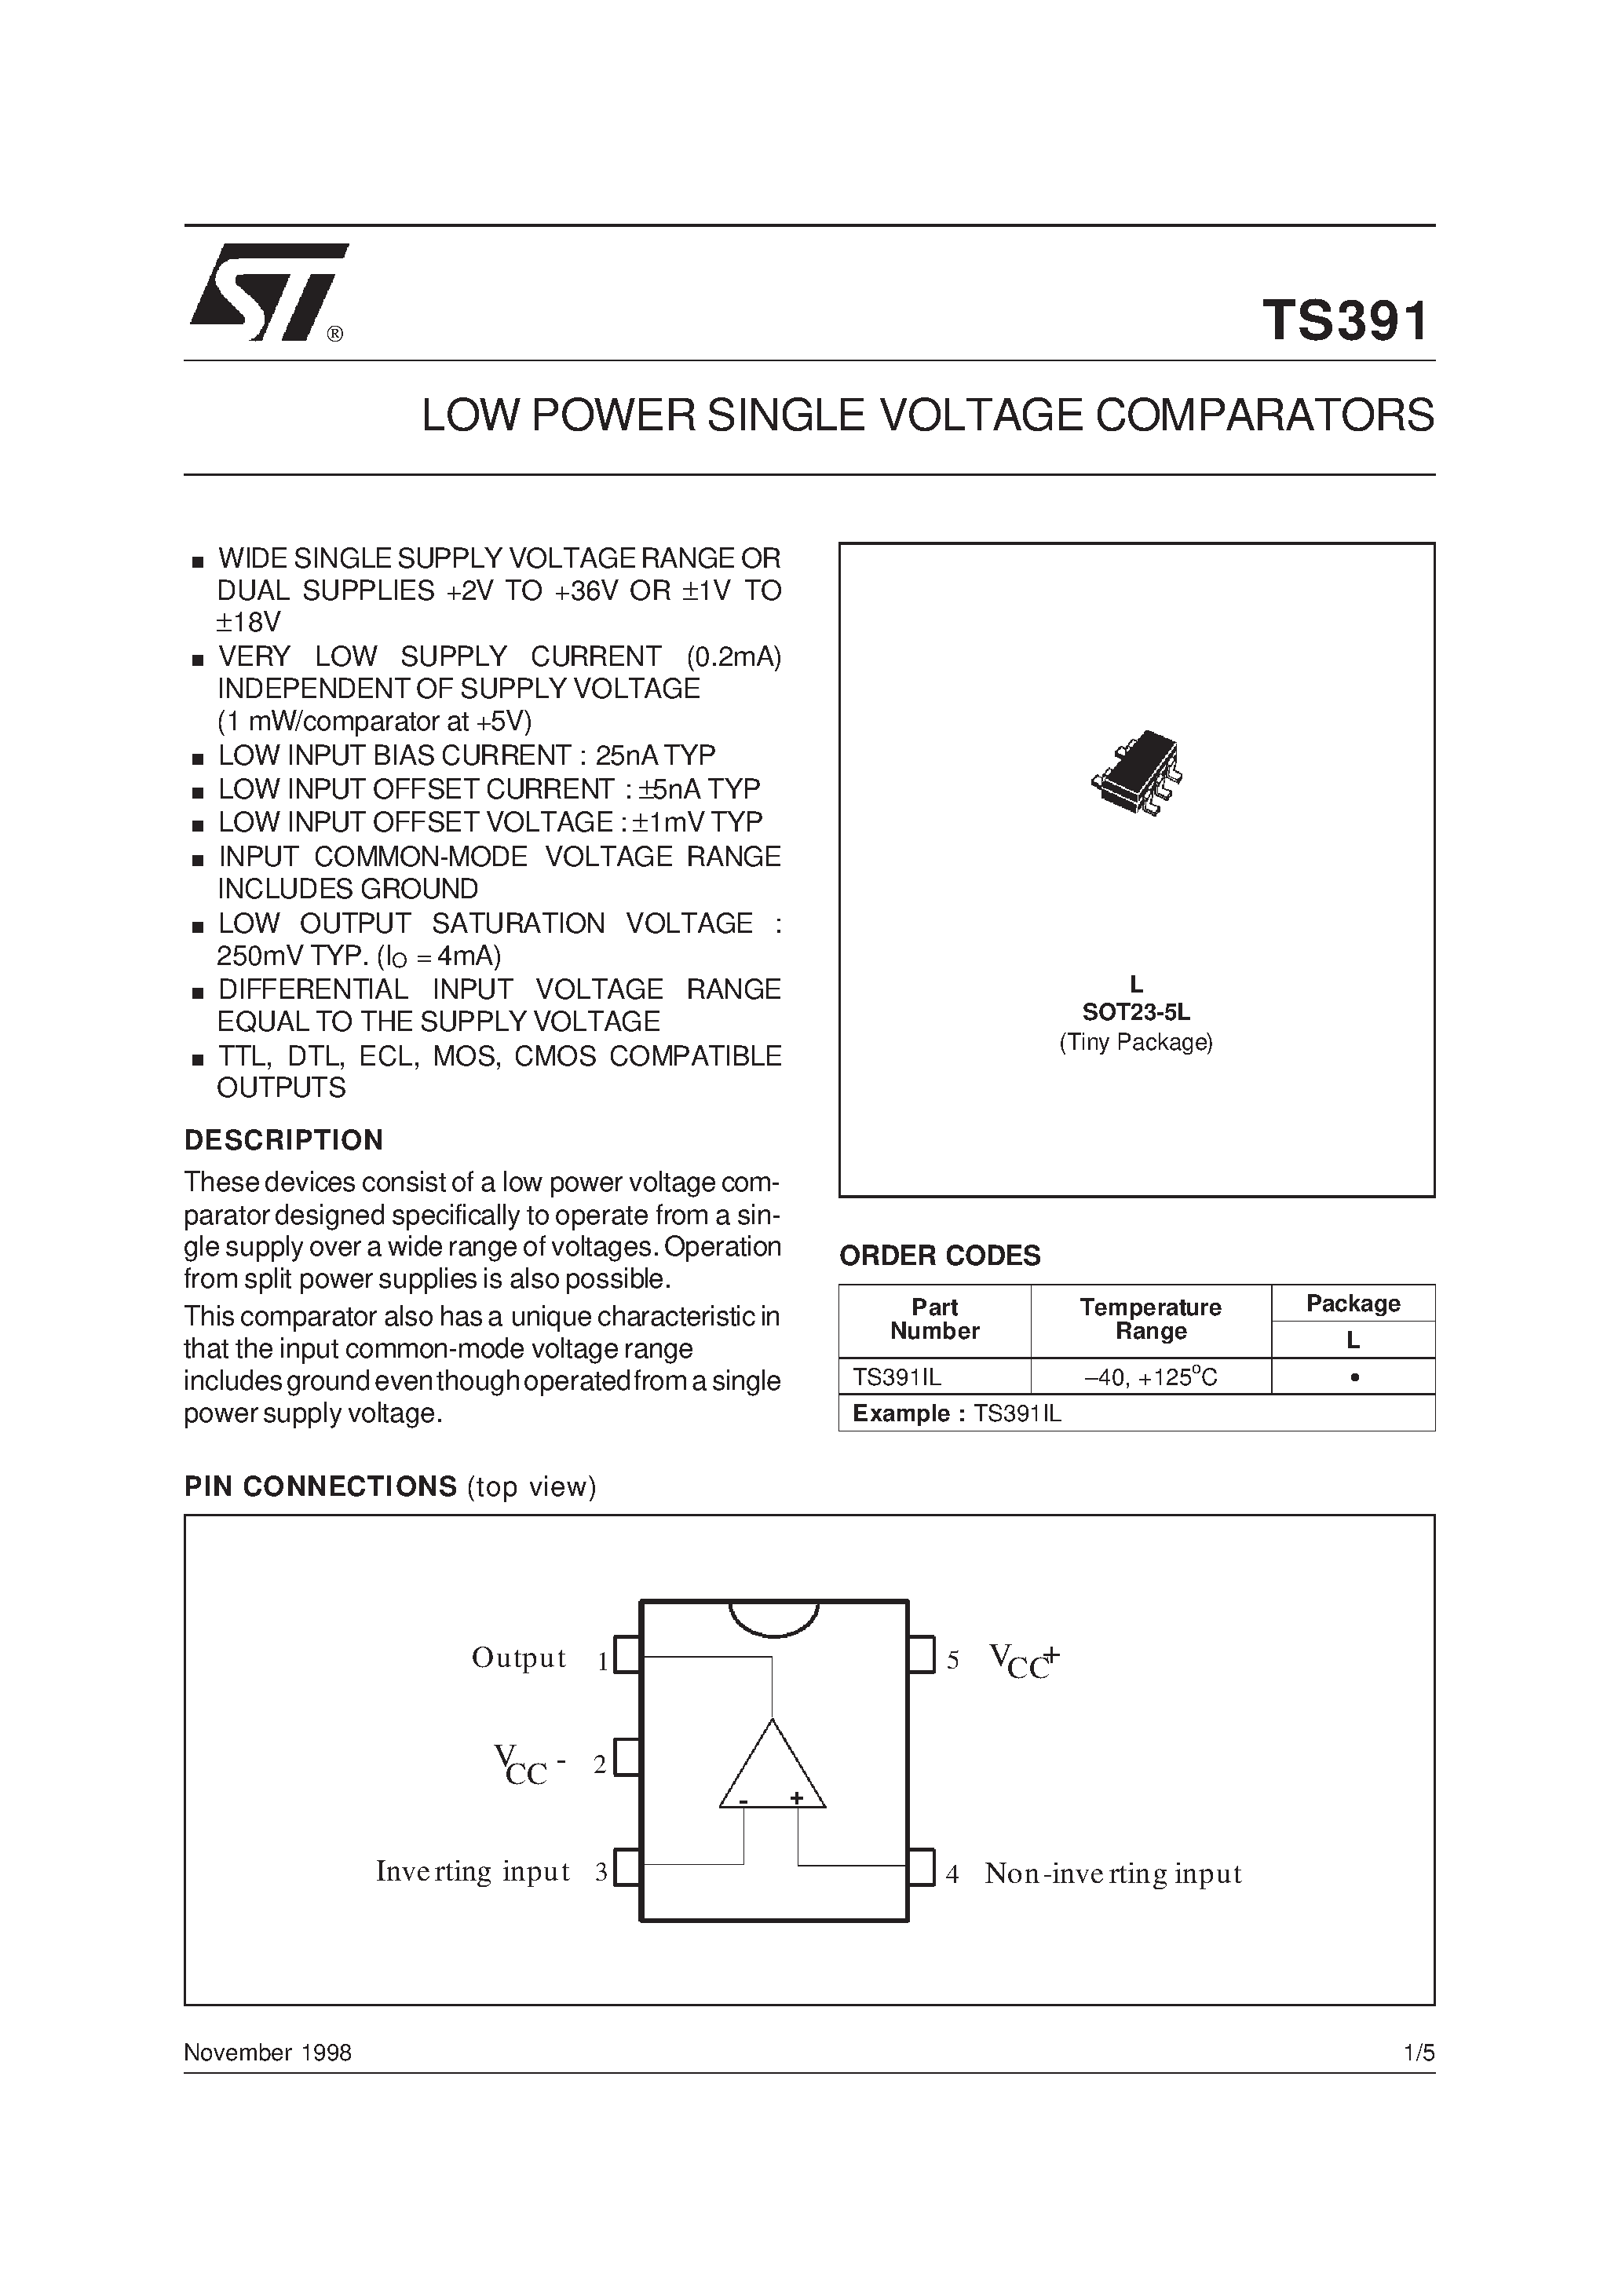 Datasheet TS391 - LOWPOWER SINGLE VOLTAGE COMPARATORS page 1